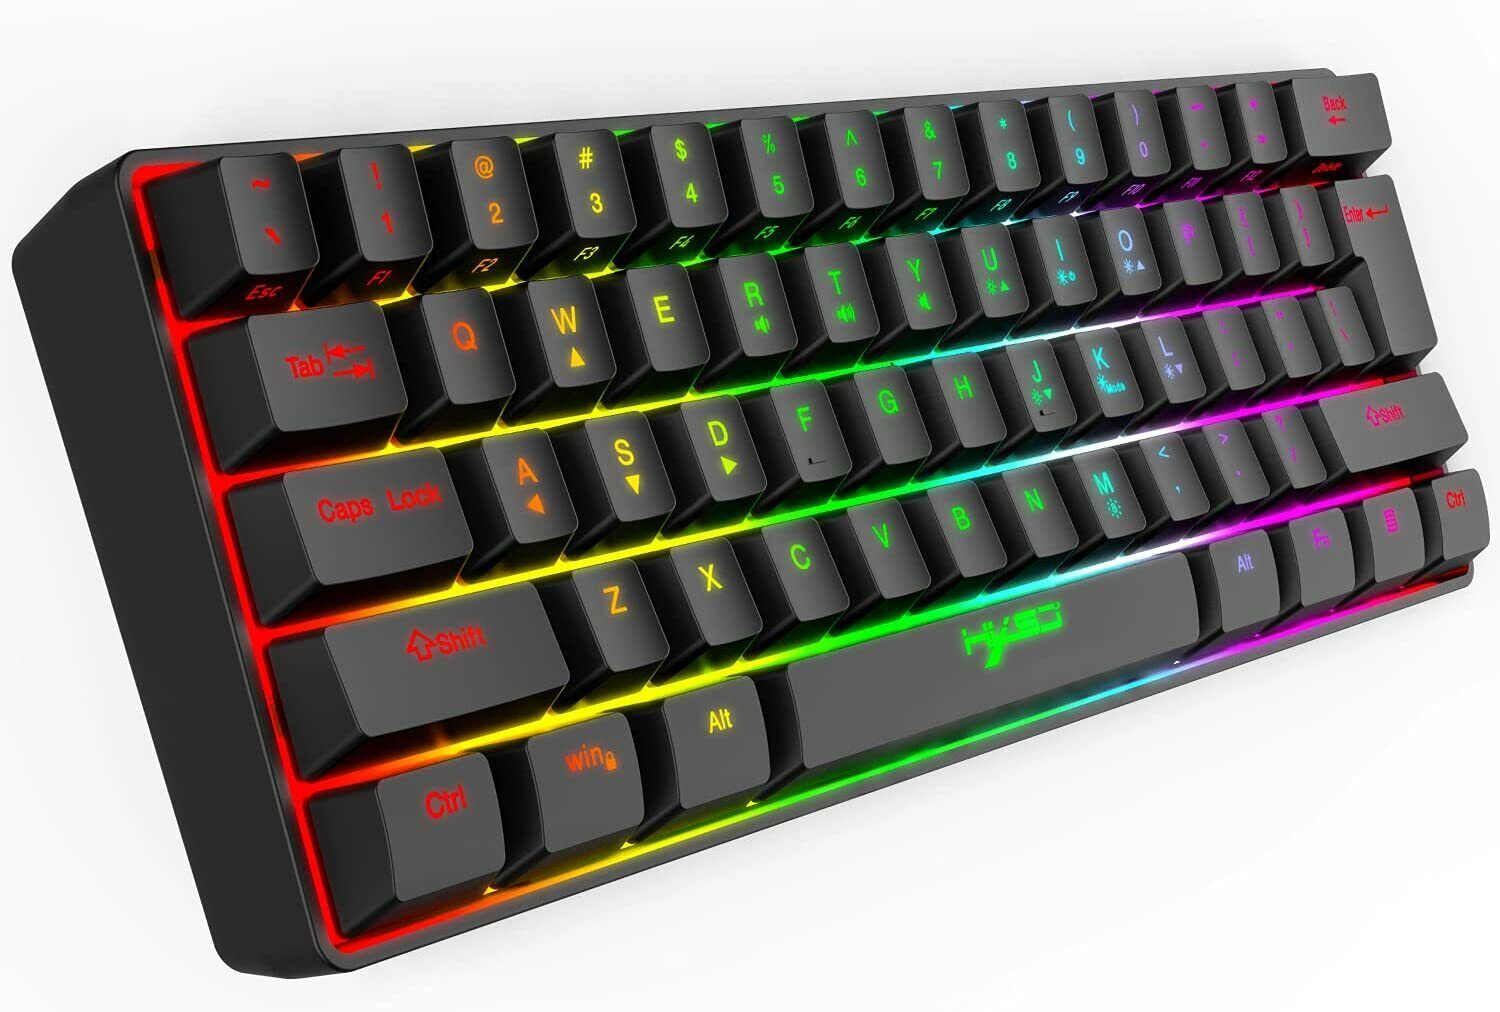 60% Gaming Keyboard USB Wired 61 Keys RGB LED Backlit for PS4 PC MAC Office  Game | eBay